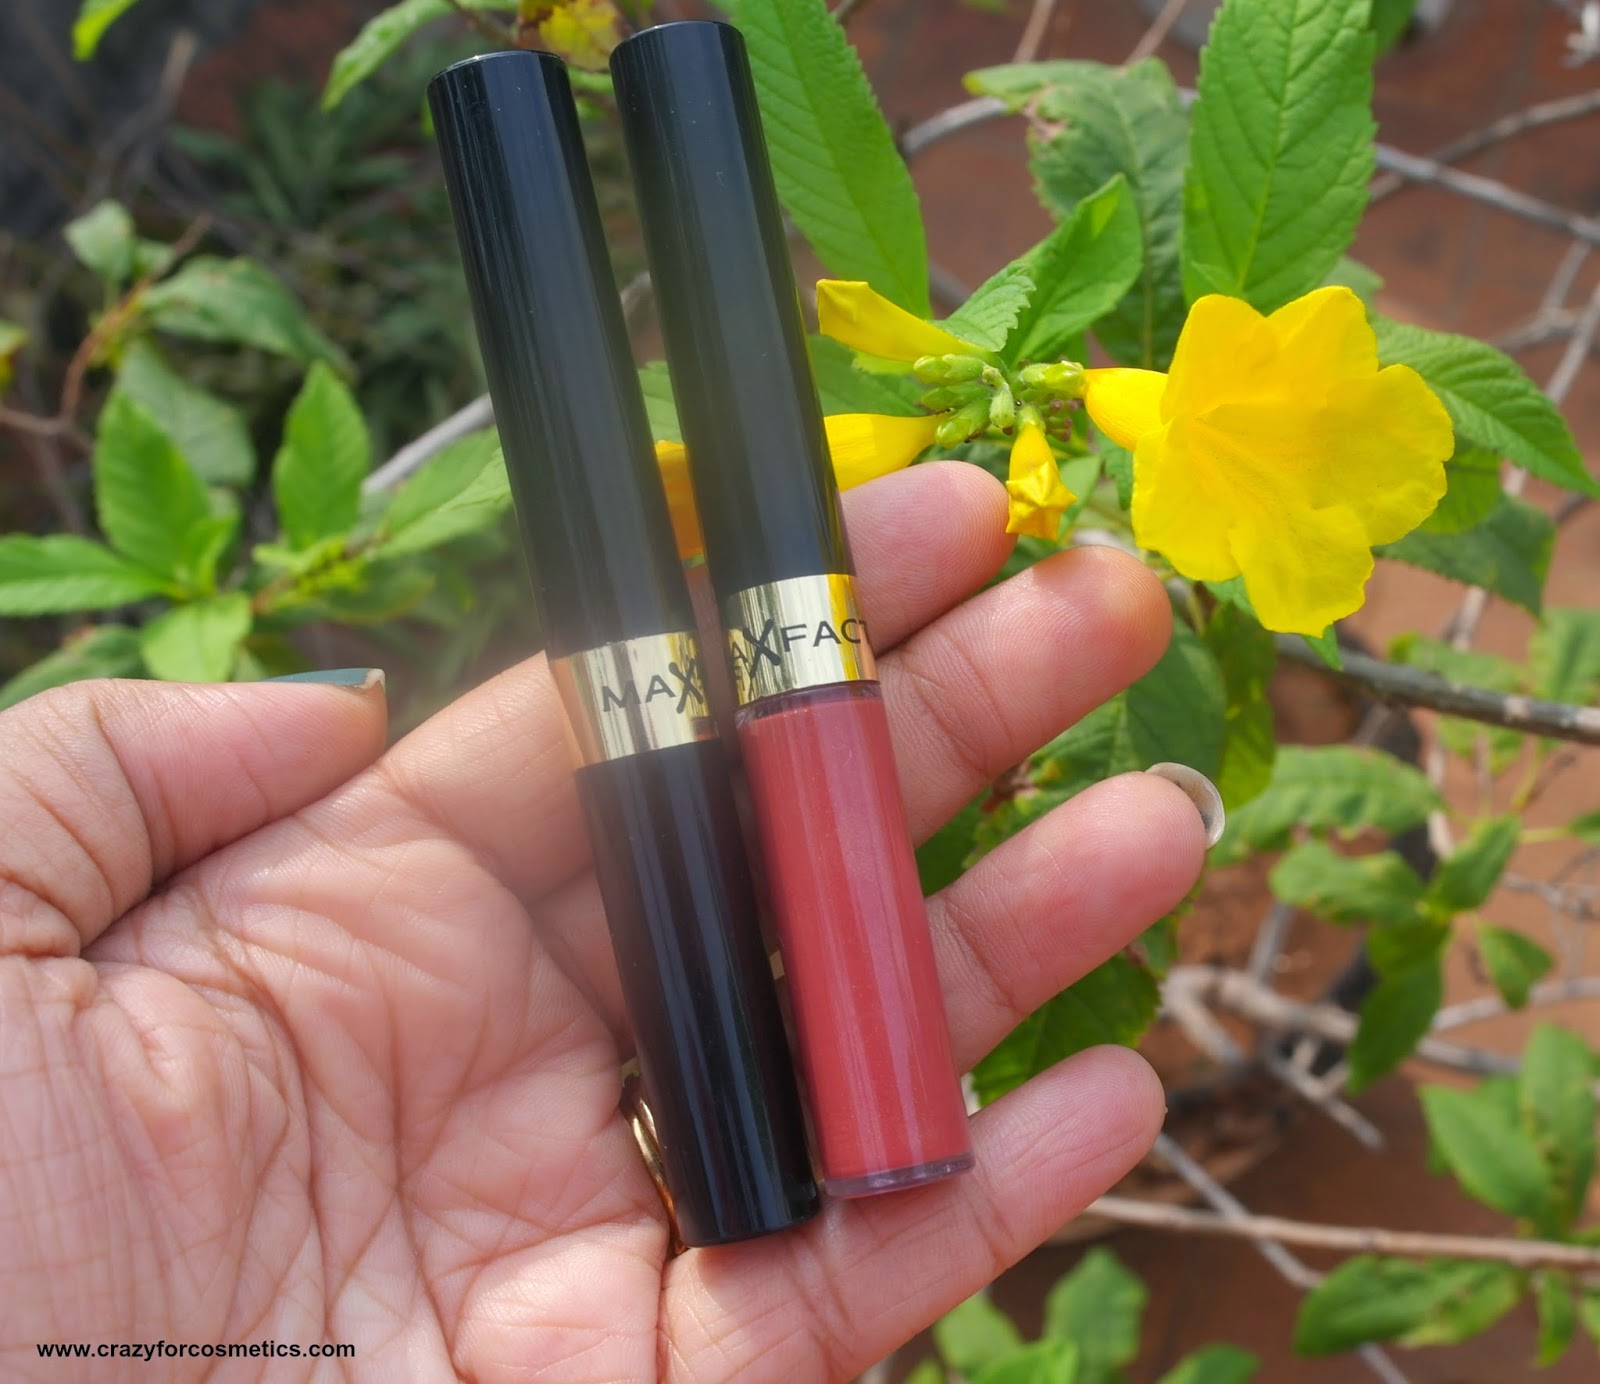 Max factor Lipfinity Lip Tint in Spicy swatches